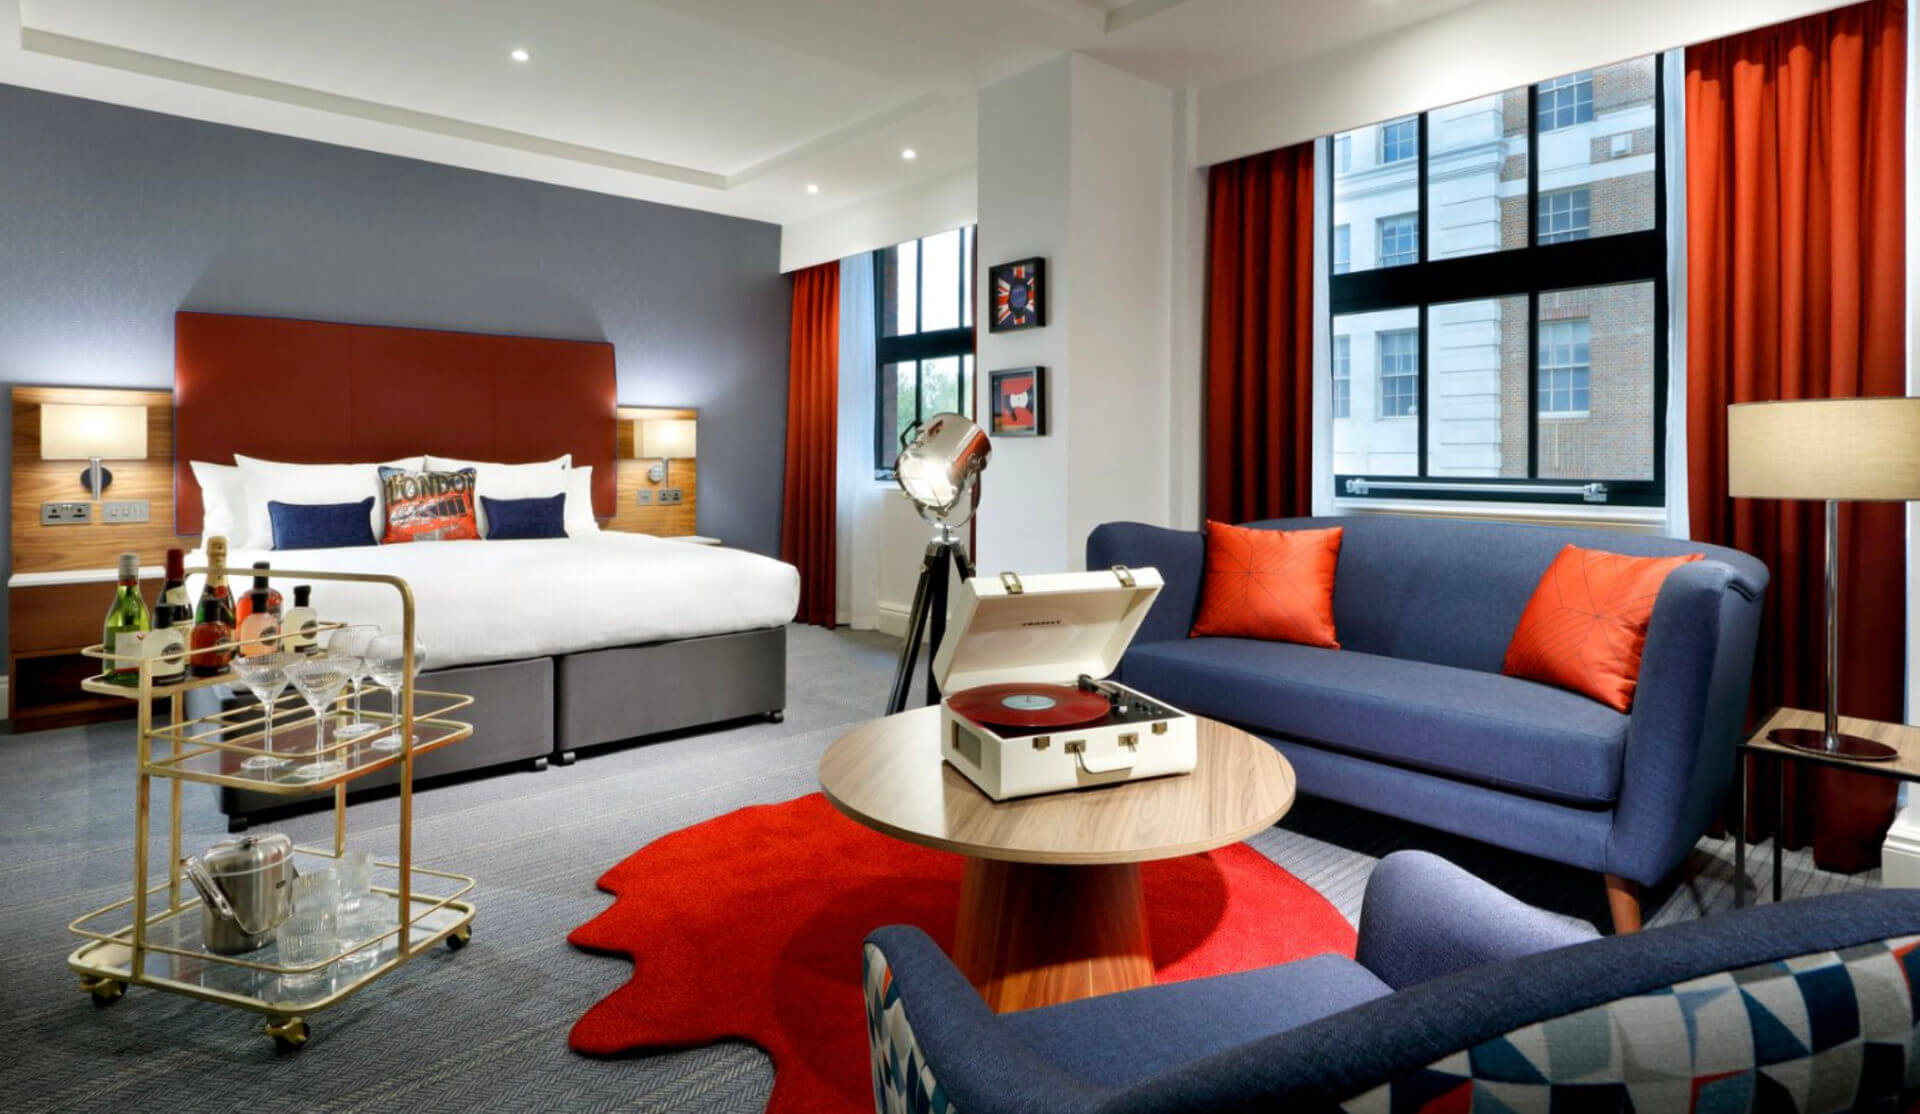 Luxuria Lifestyle's Global Editor reviews the Hard Rock Hotel in London